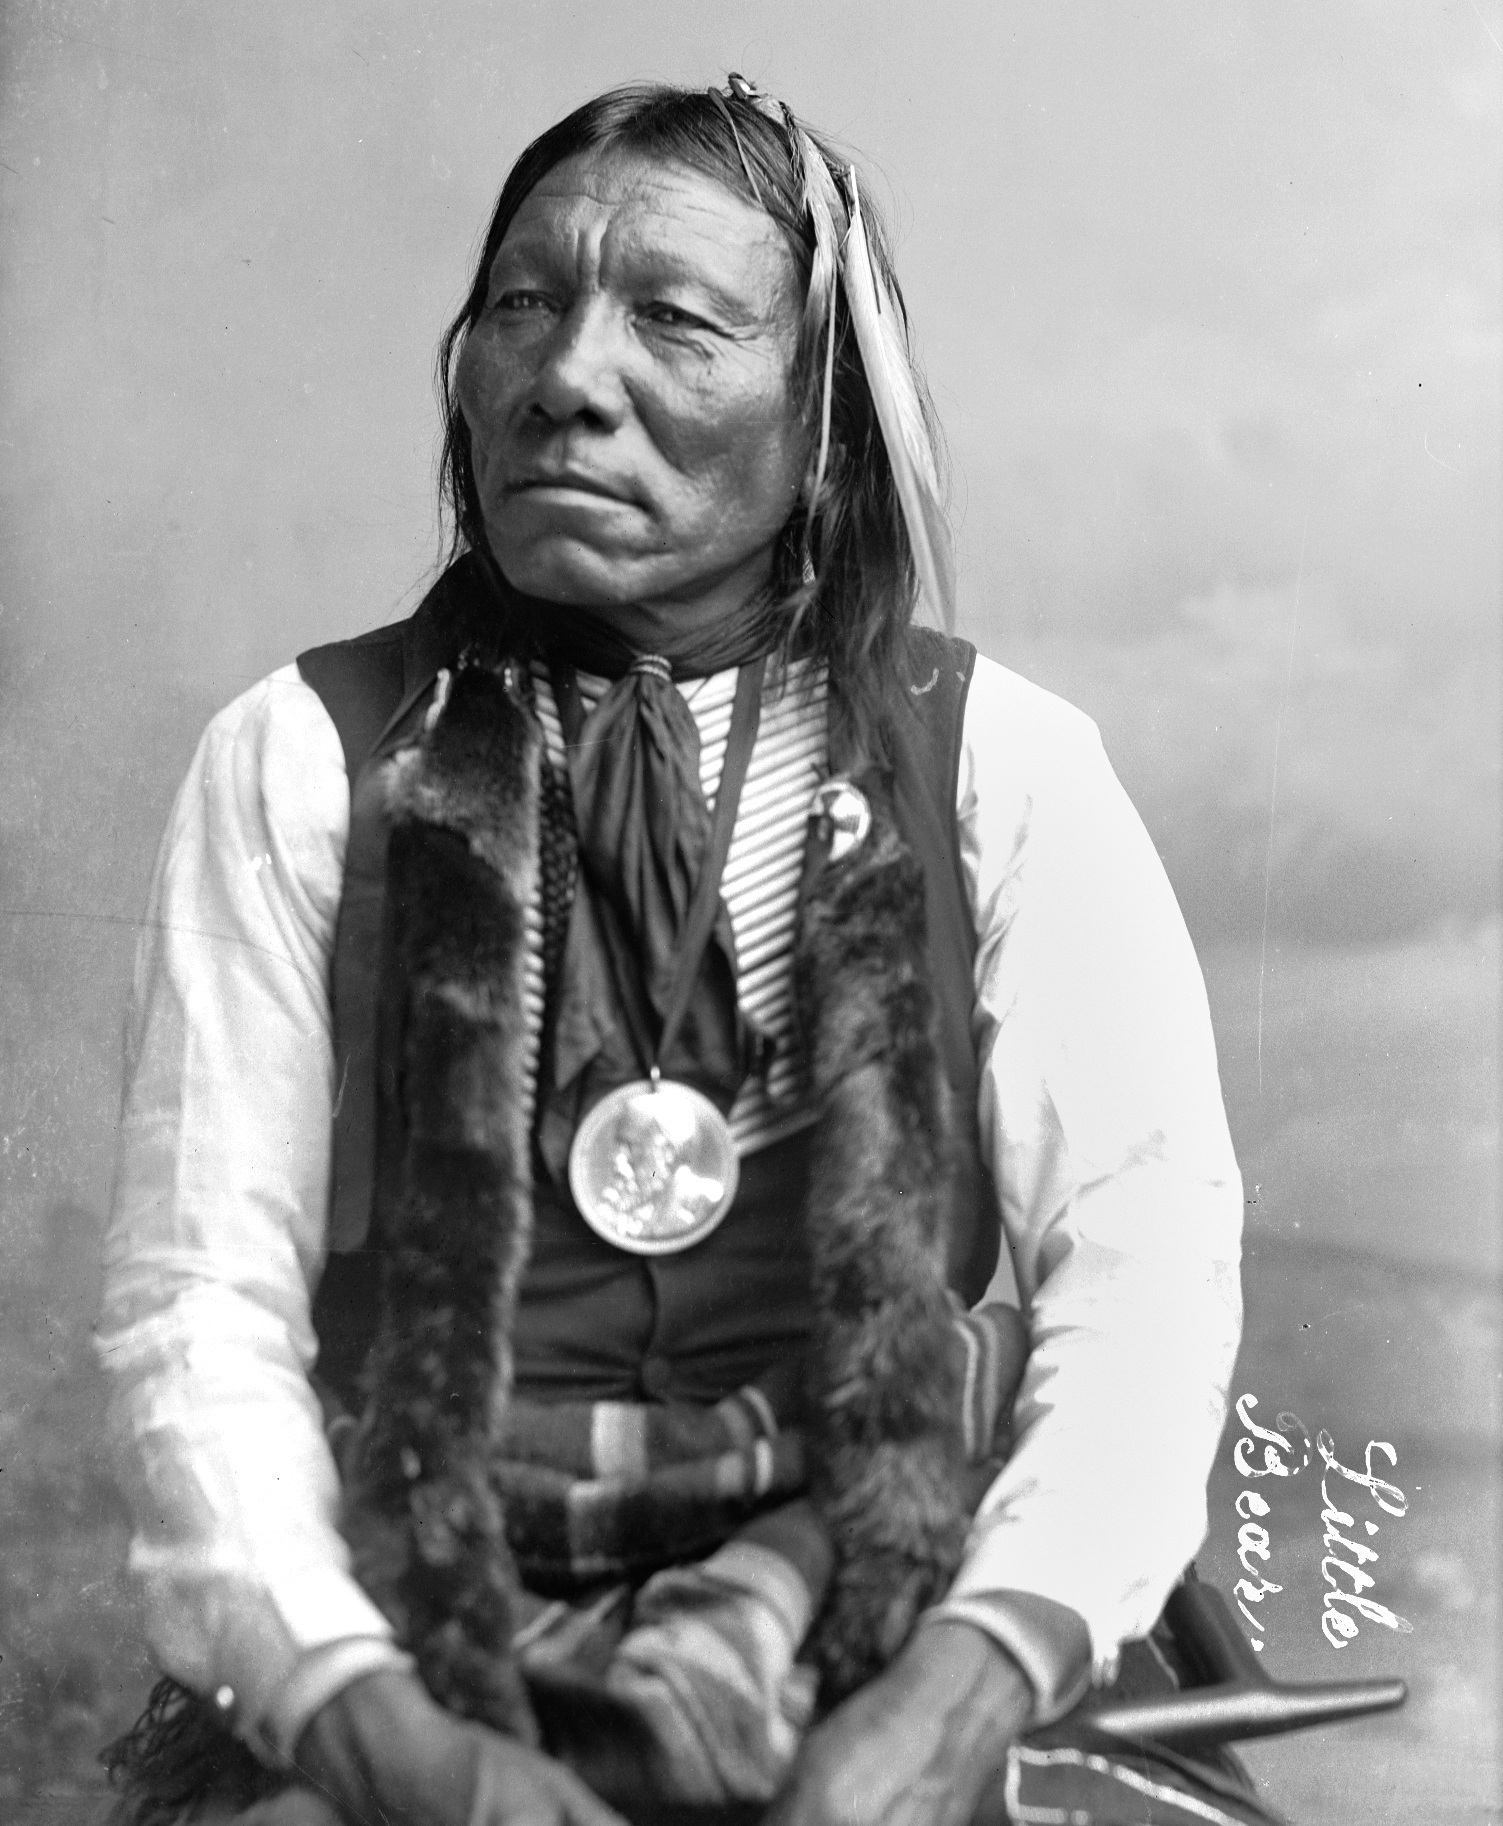 http://www.nps.gov/sand/learn/historyculture/images/Little-Bear-Sand-Creek-participant.jpg